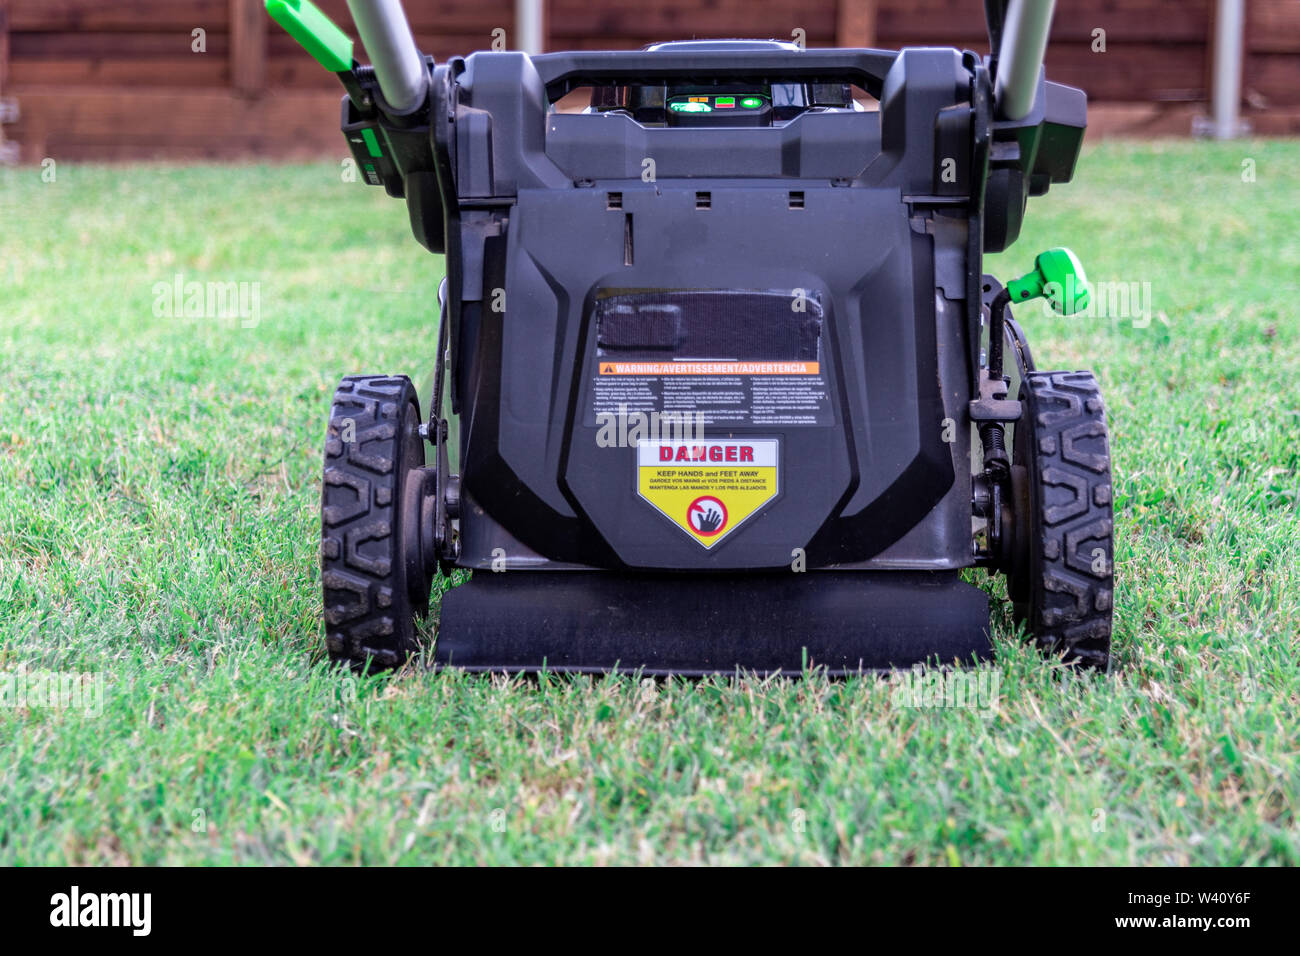 Battery powered 56 volt electric lawnmower for eco lawn care Stock Photo